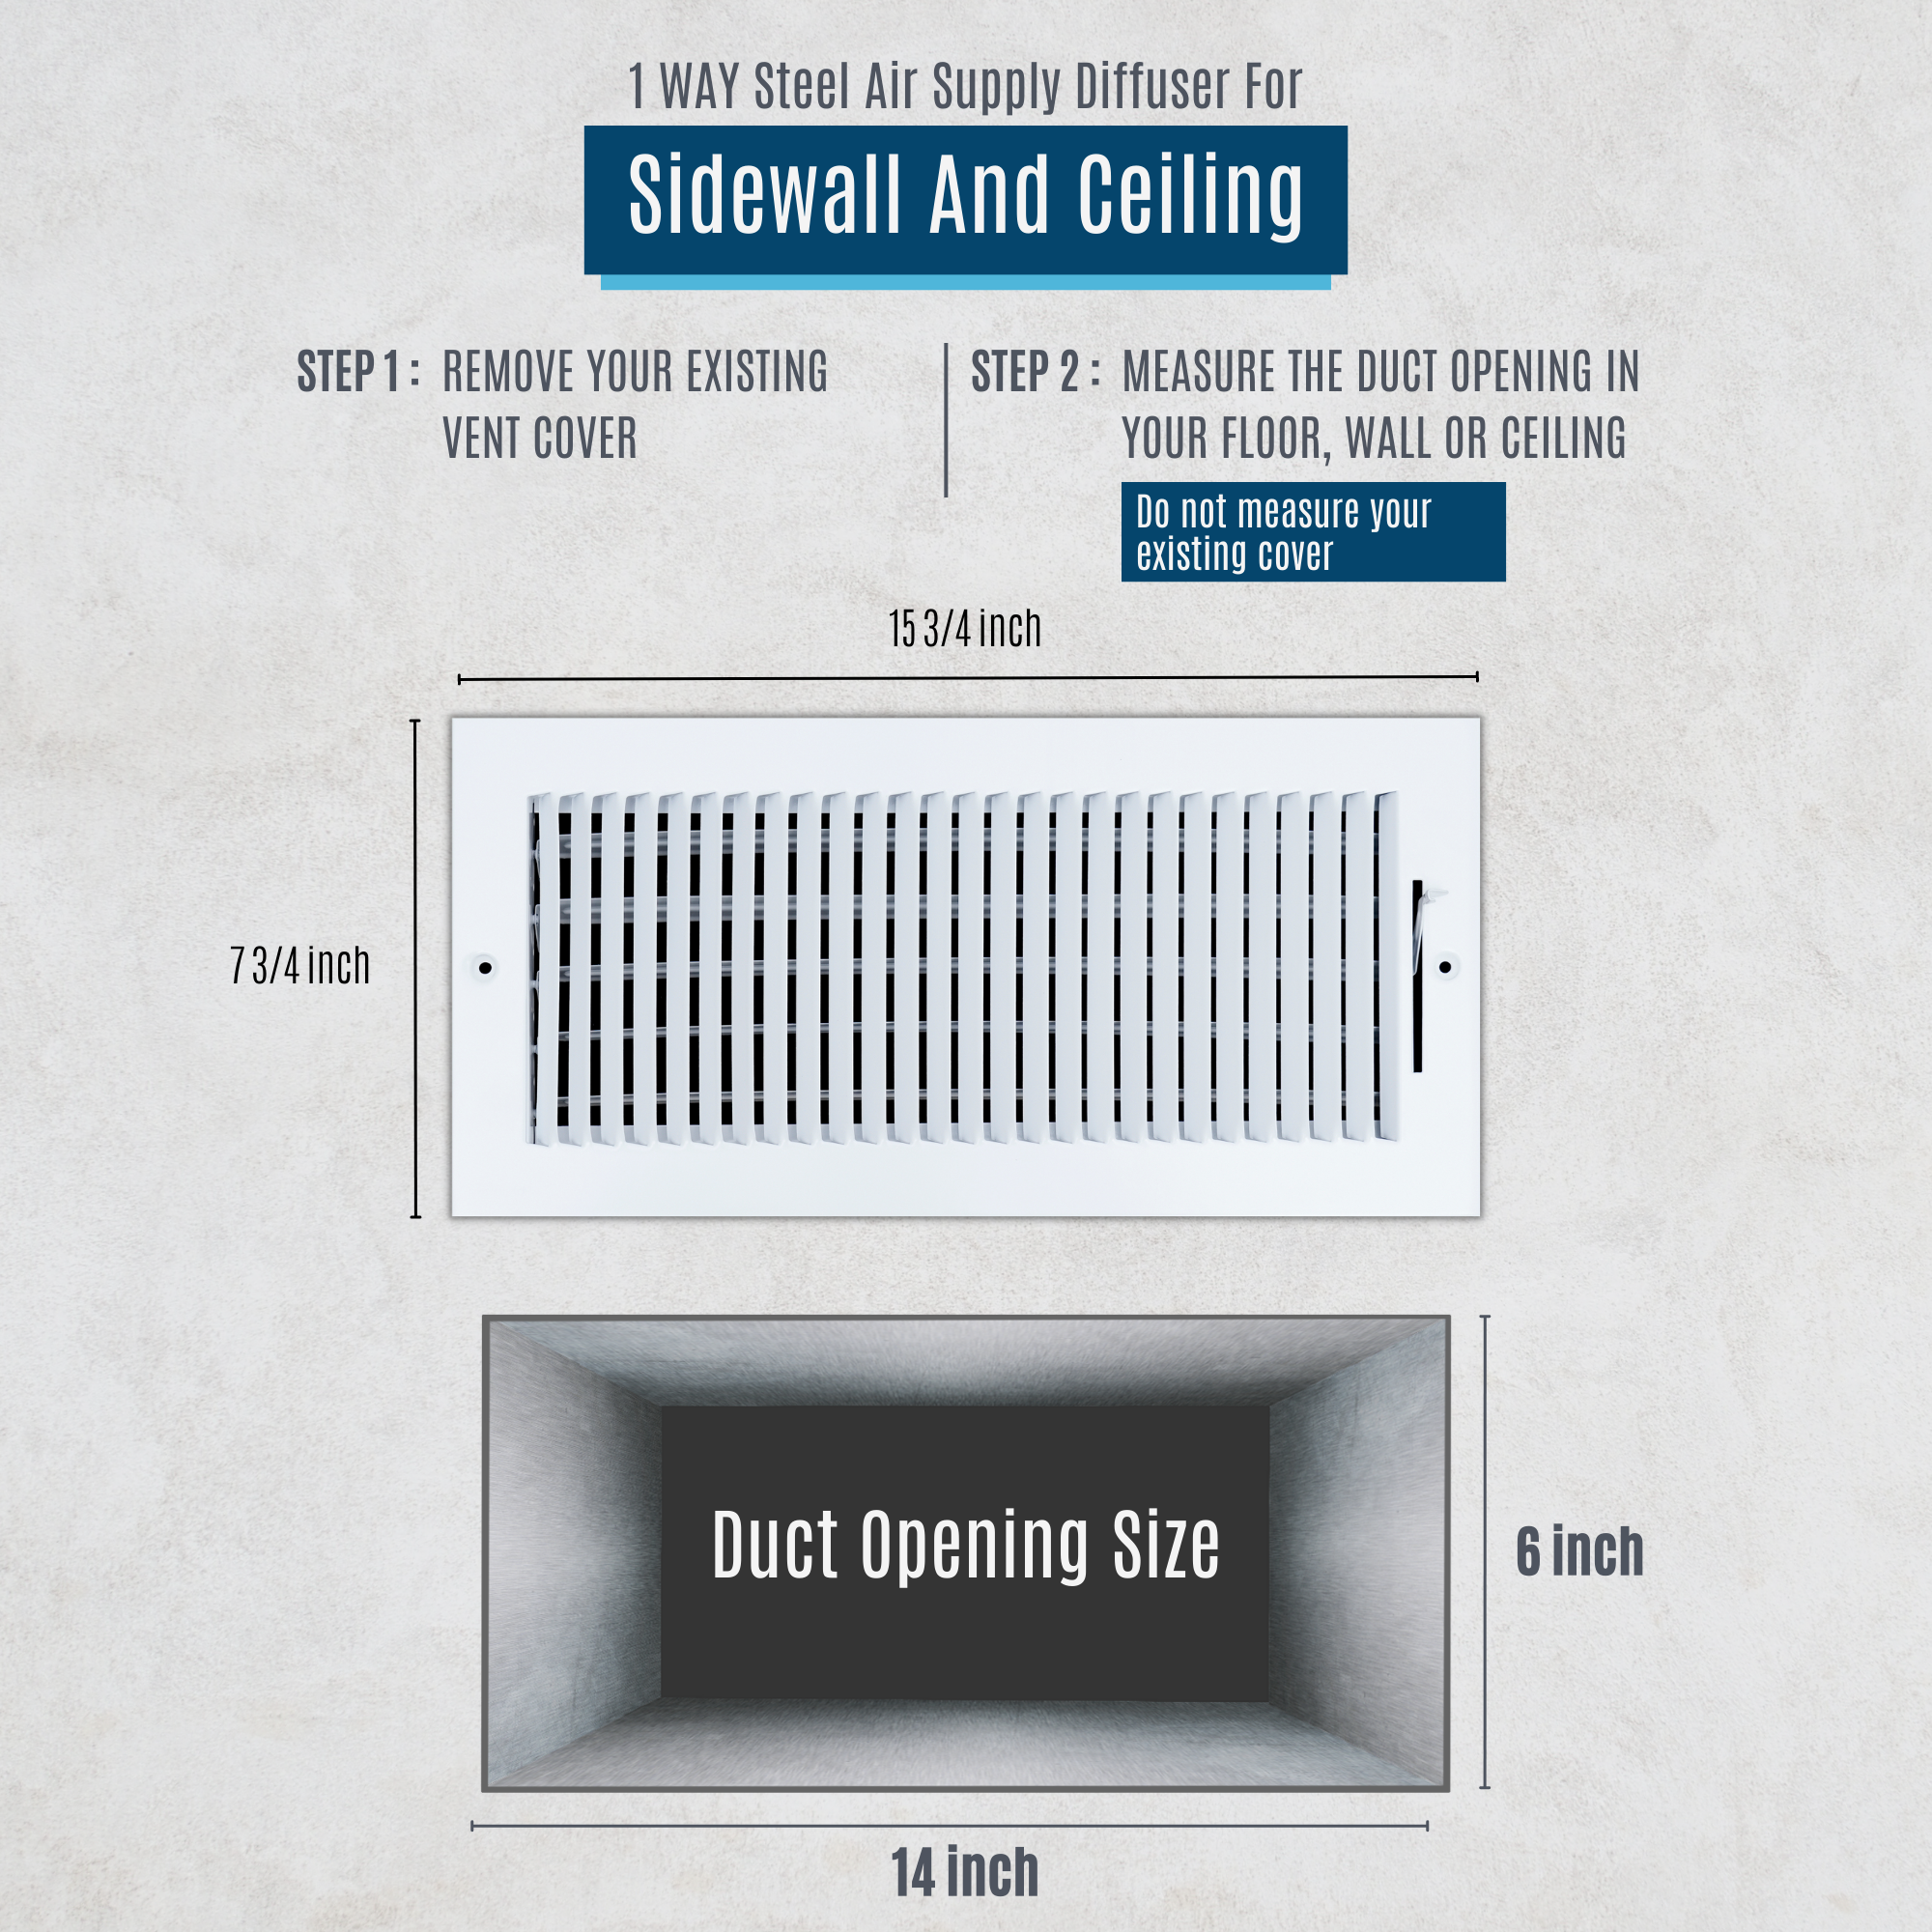 14 X 6 Duct Opening | 1 WAY Steel Air Supply Diffuser for Sidewall and Ceiling